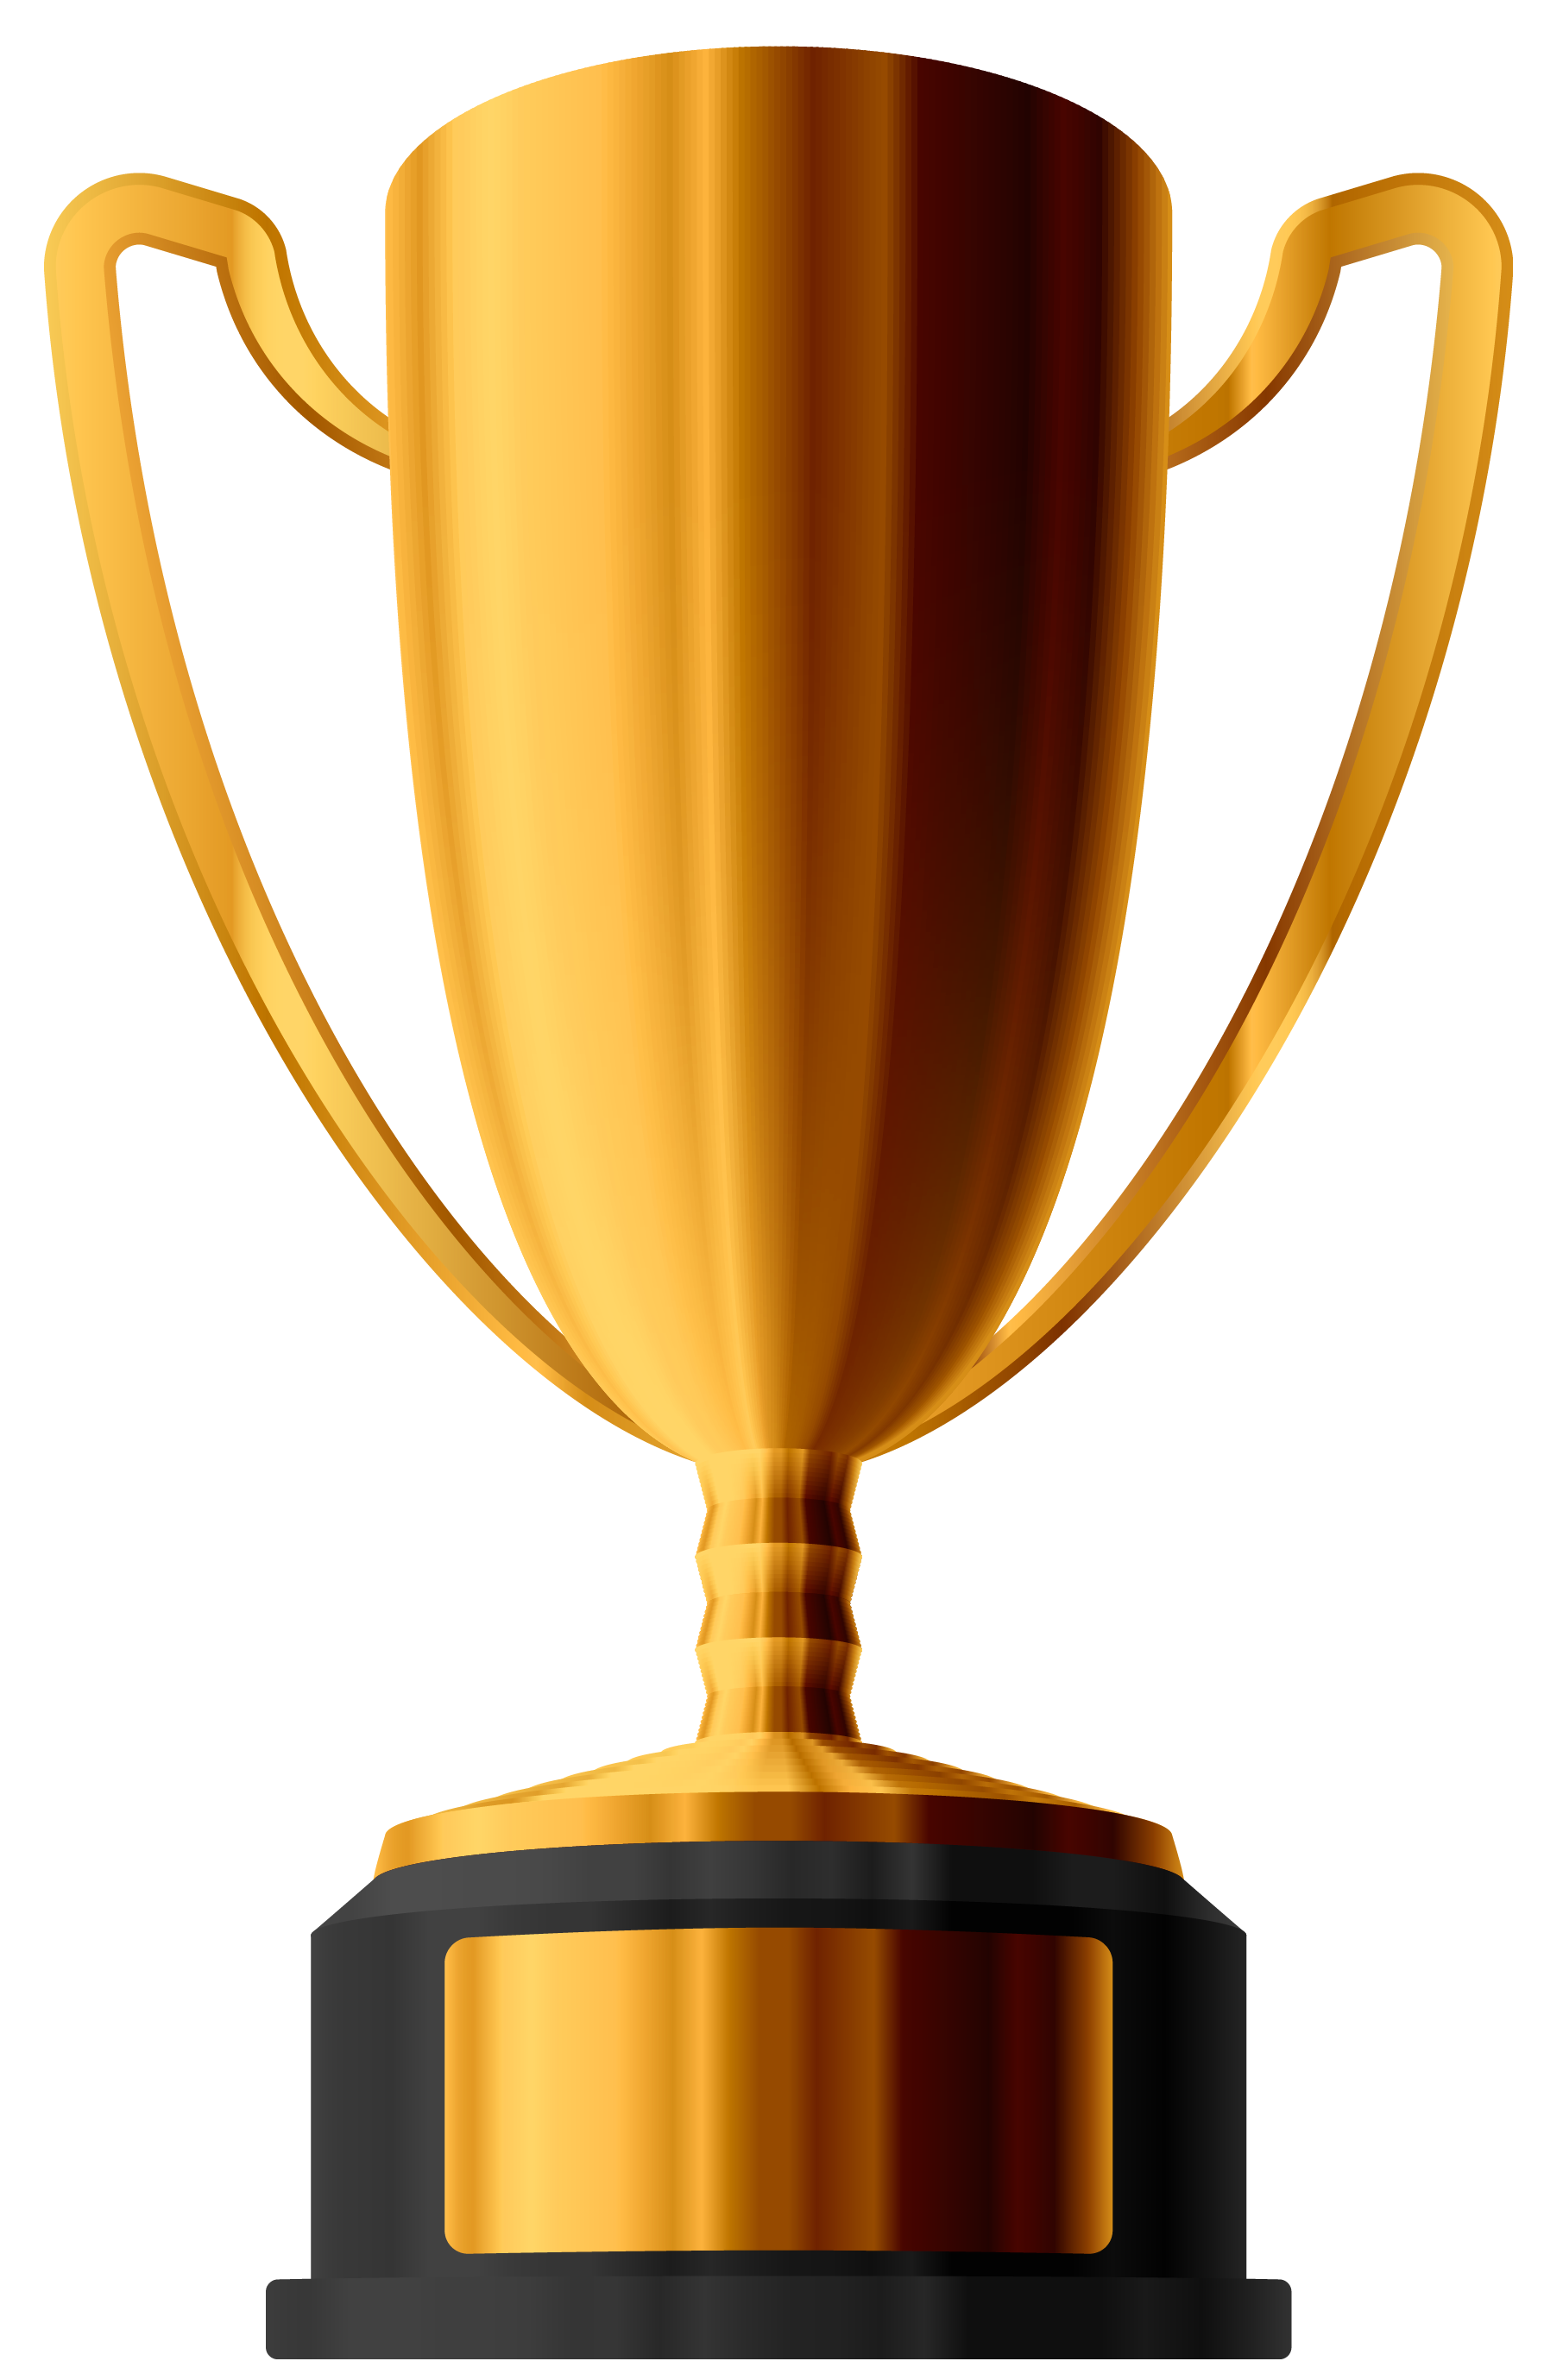 Png transparent free images. Clipart star trophy